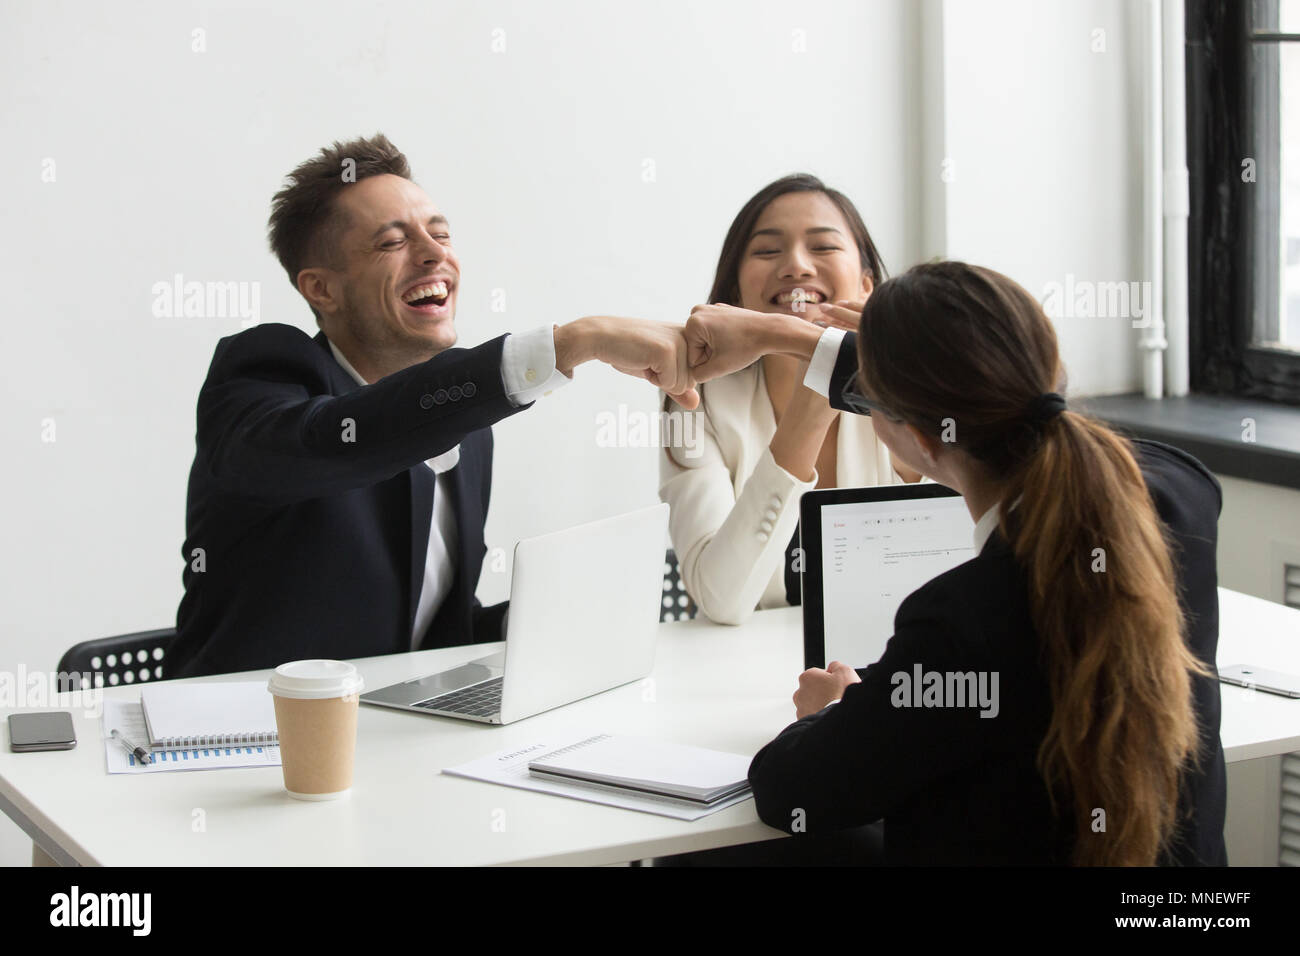 Excited colleagues giving fists bump celebrating success Stock Photo